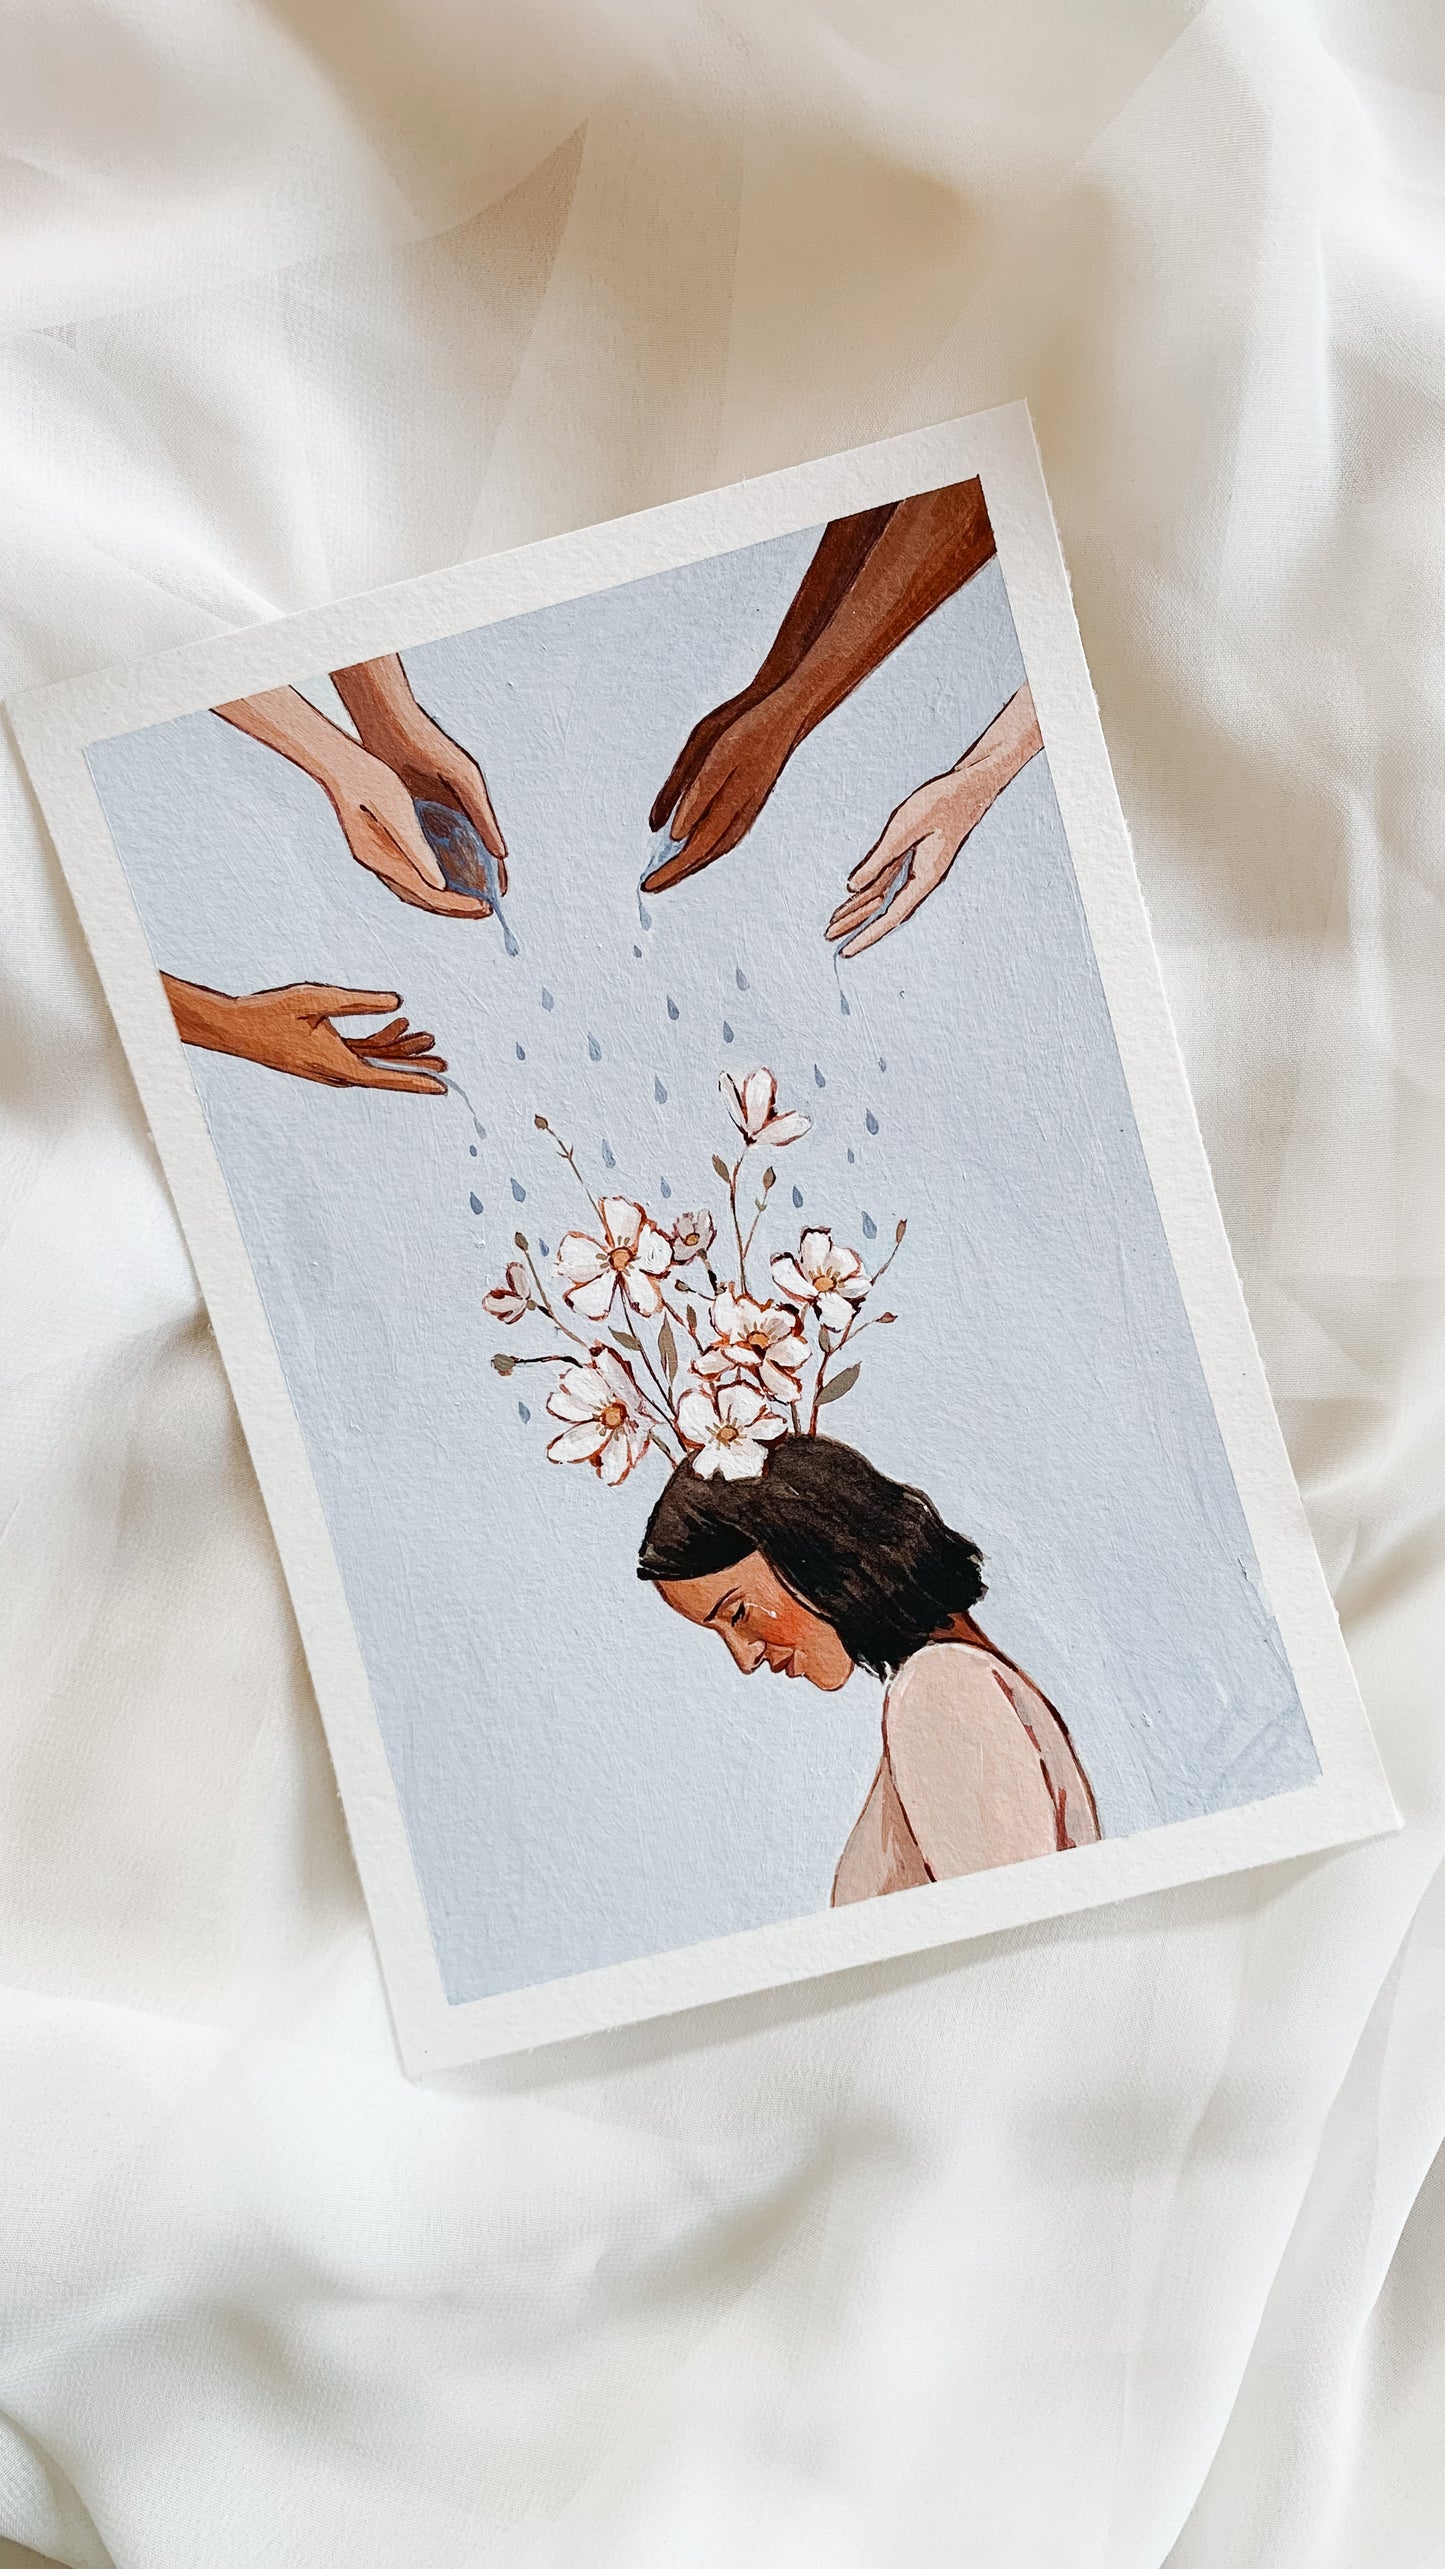 'The Many Hands That Water Me When I Cannot Do It Myself' 5x7 inch original painting